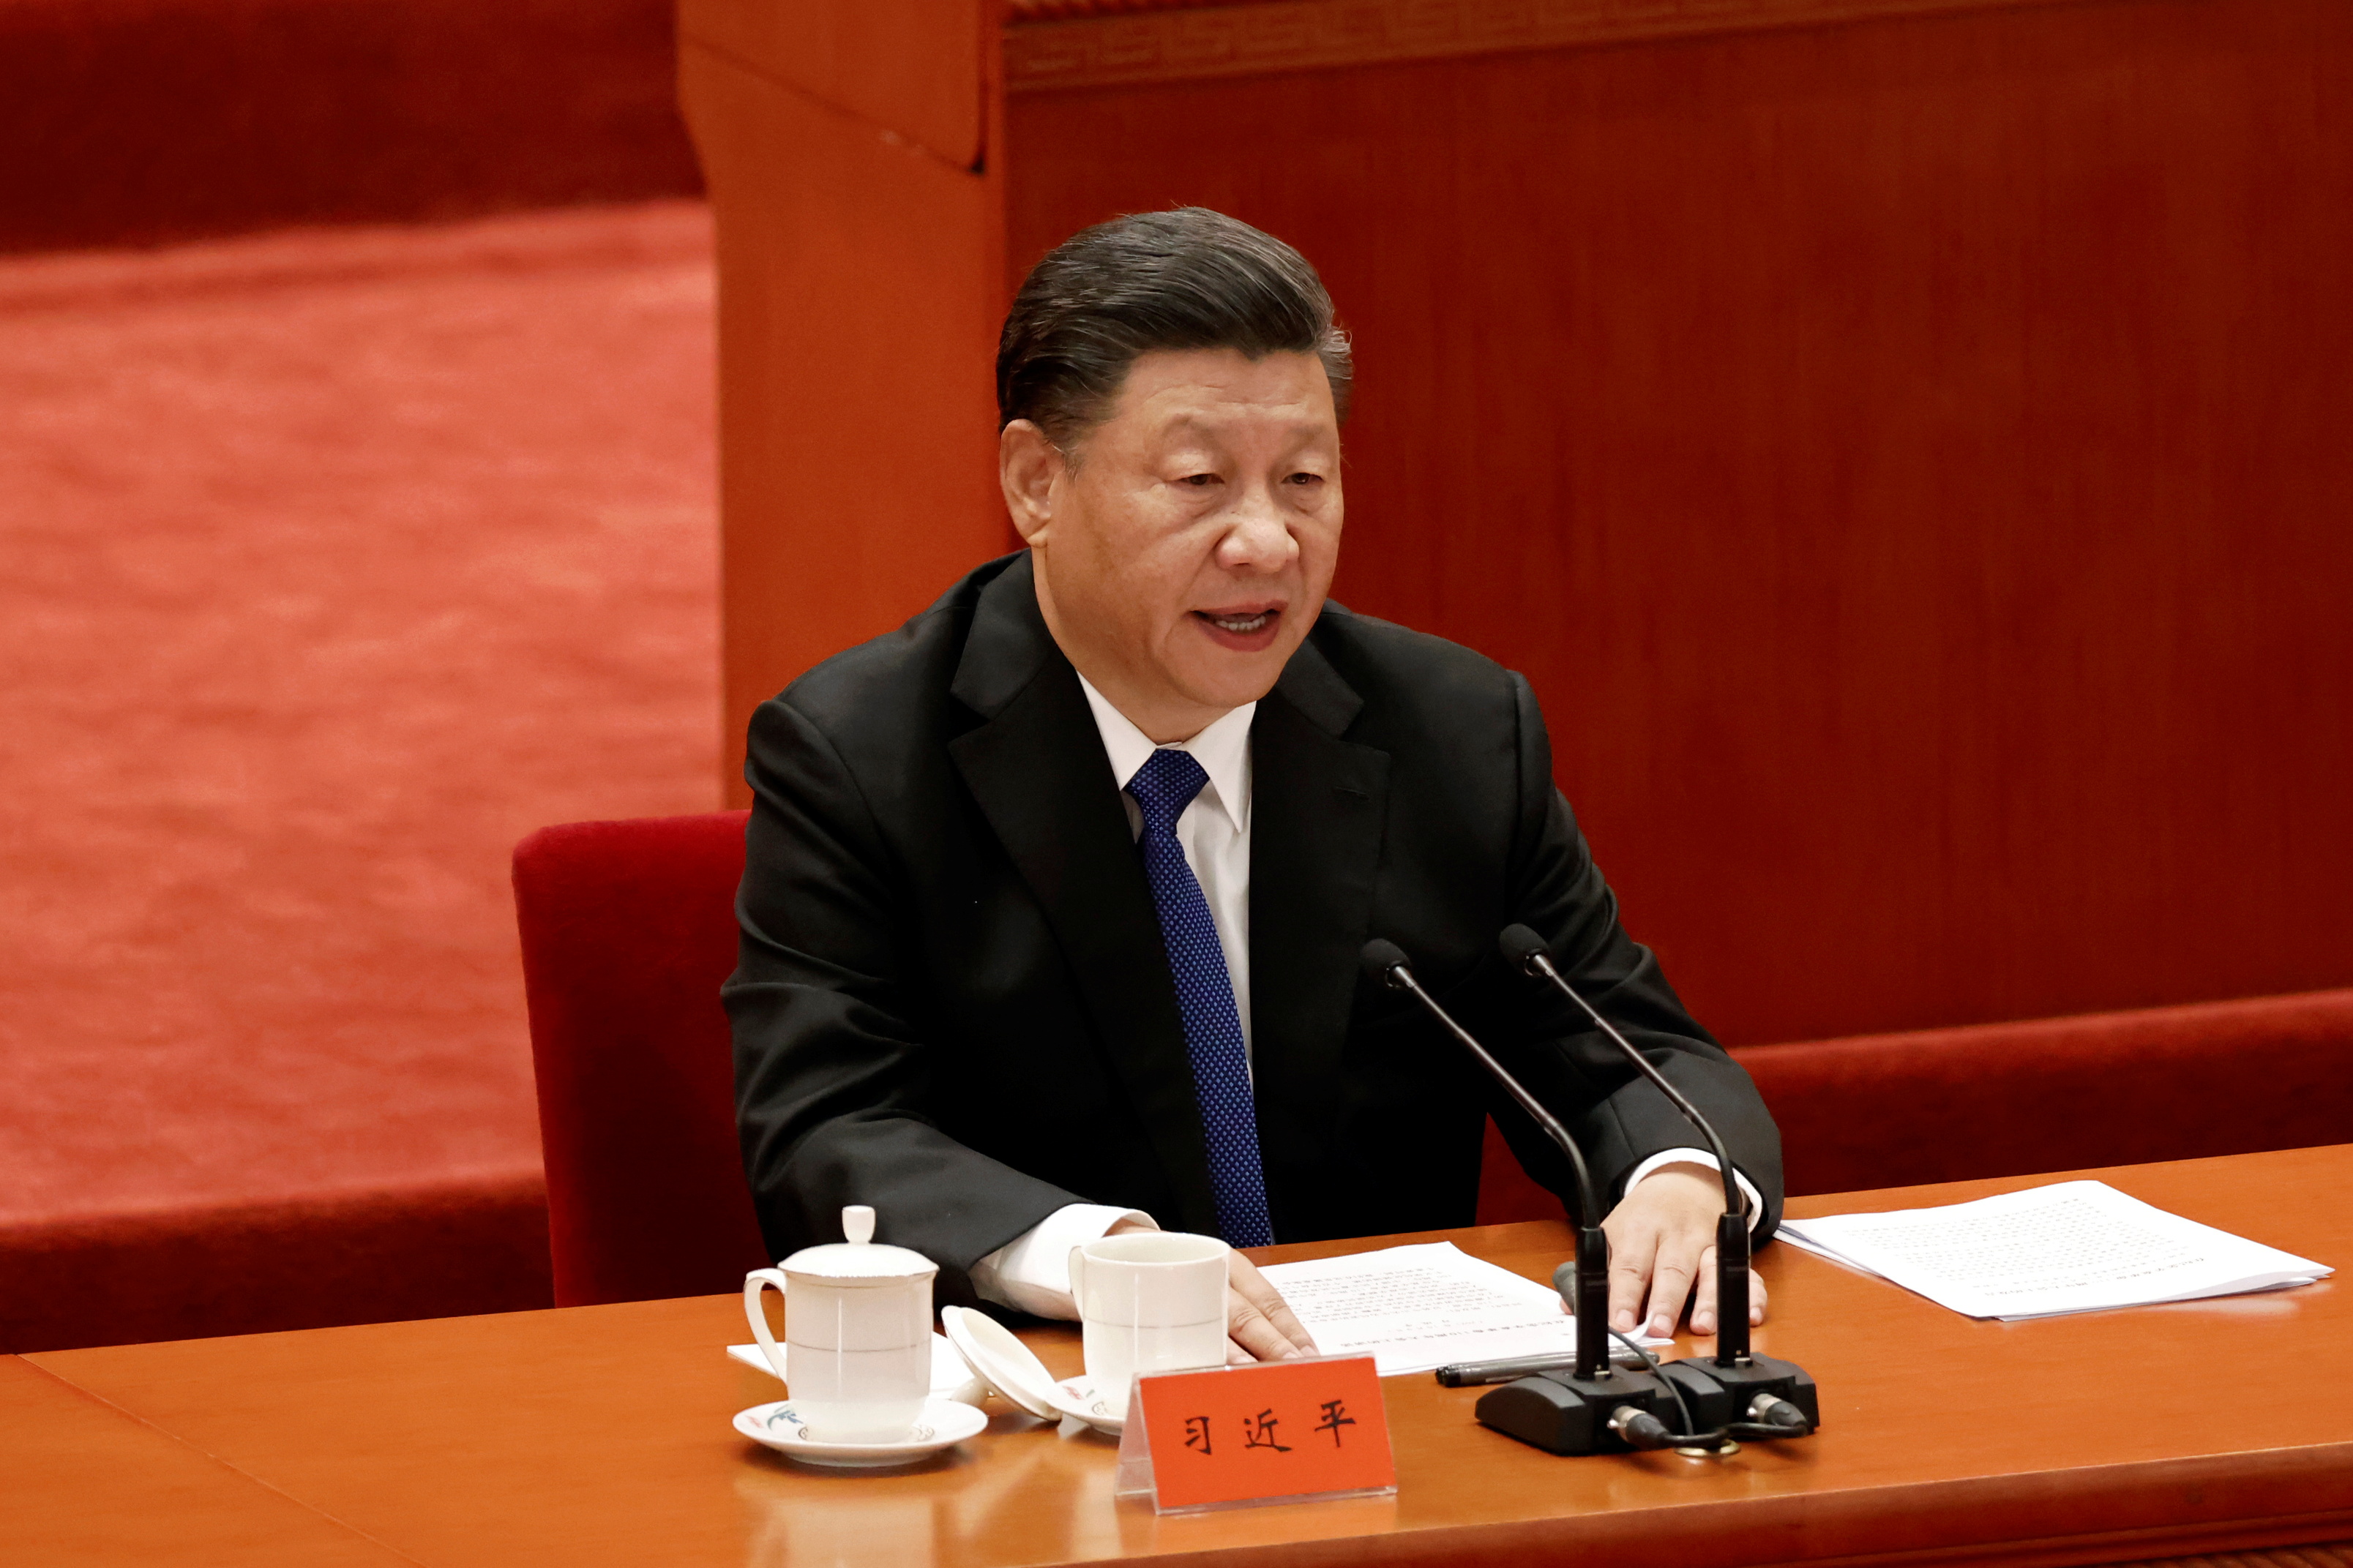 Chinese President Xi Jinping speaks at a meeting commemorating the 110th anniversary of Xinhai Revolution at the Great Hall of the People in Beijing, China on 9 October 2021. © Carlos Garcia Rawlins / Reuters